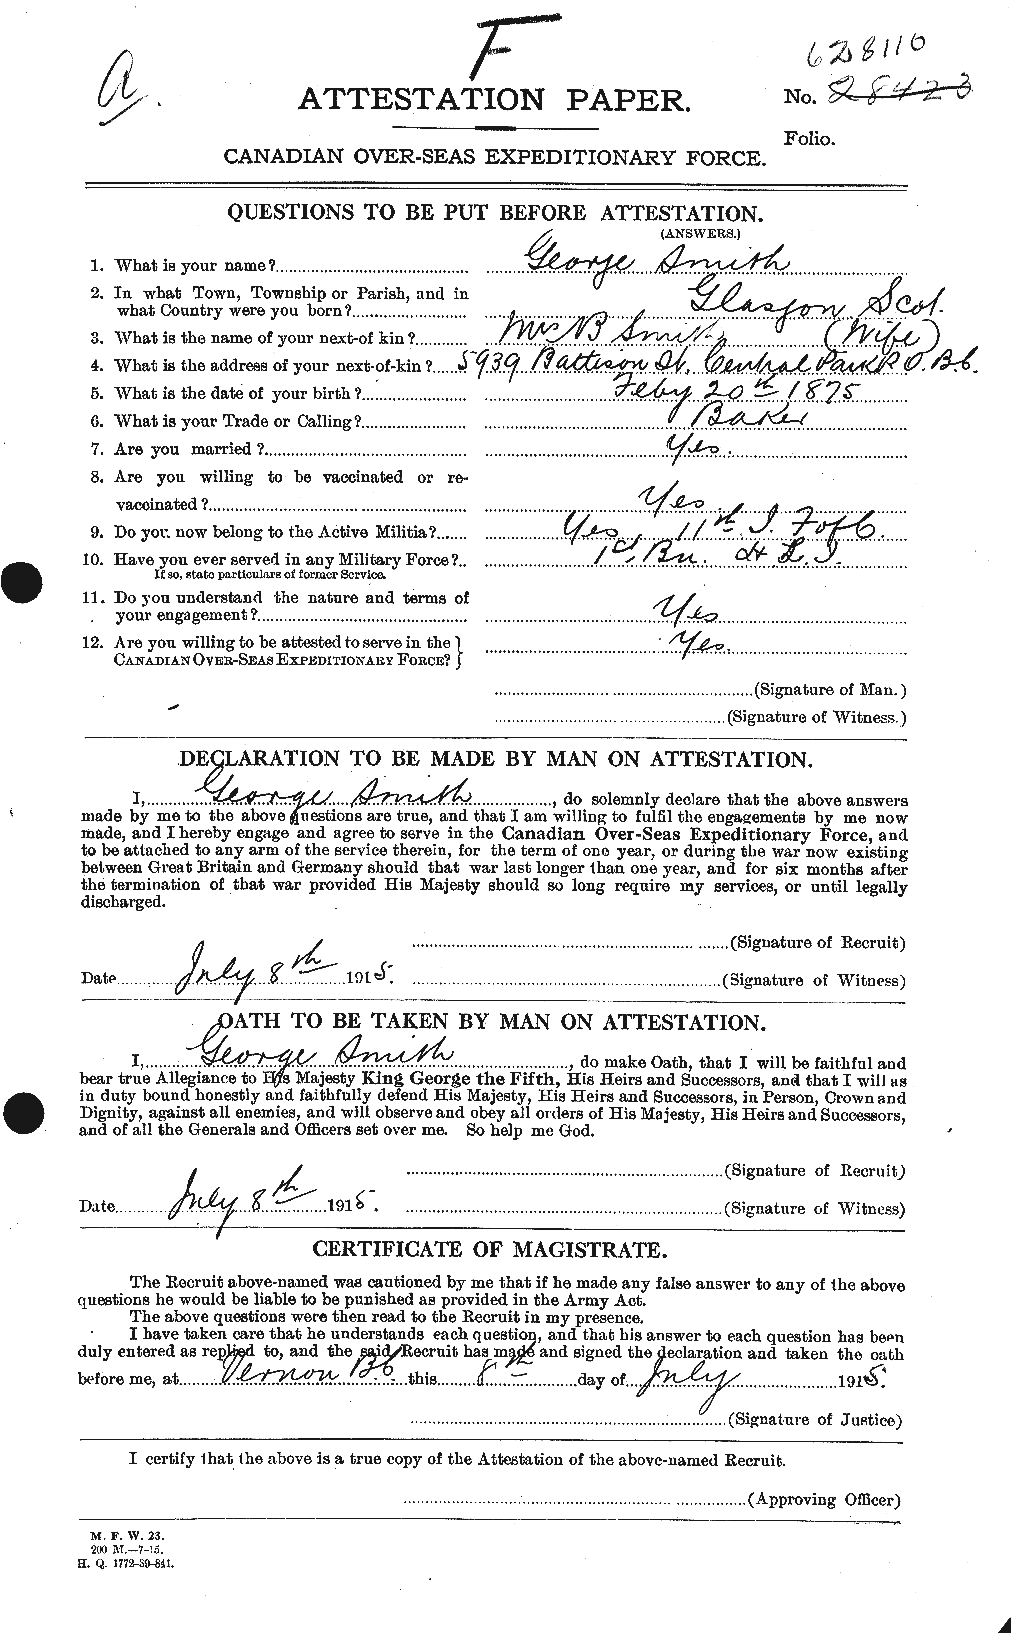 Personnel Records of the First World War - CEF 103161a